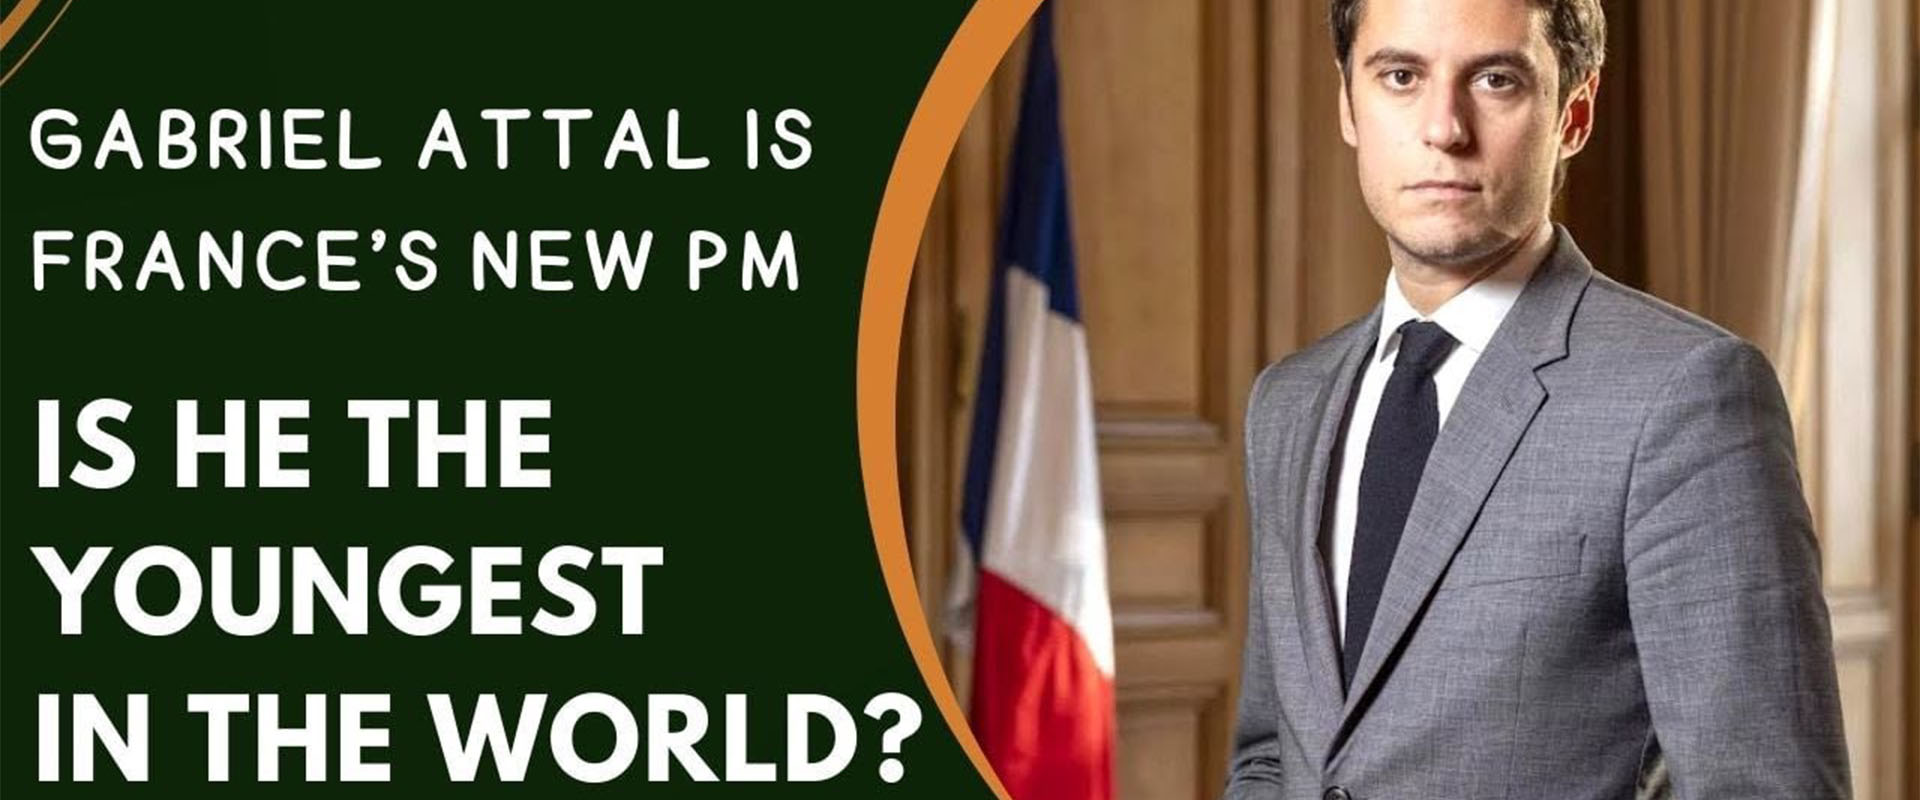 Gabriel Attal becomes France’s youngest prime minister | BBC News